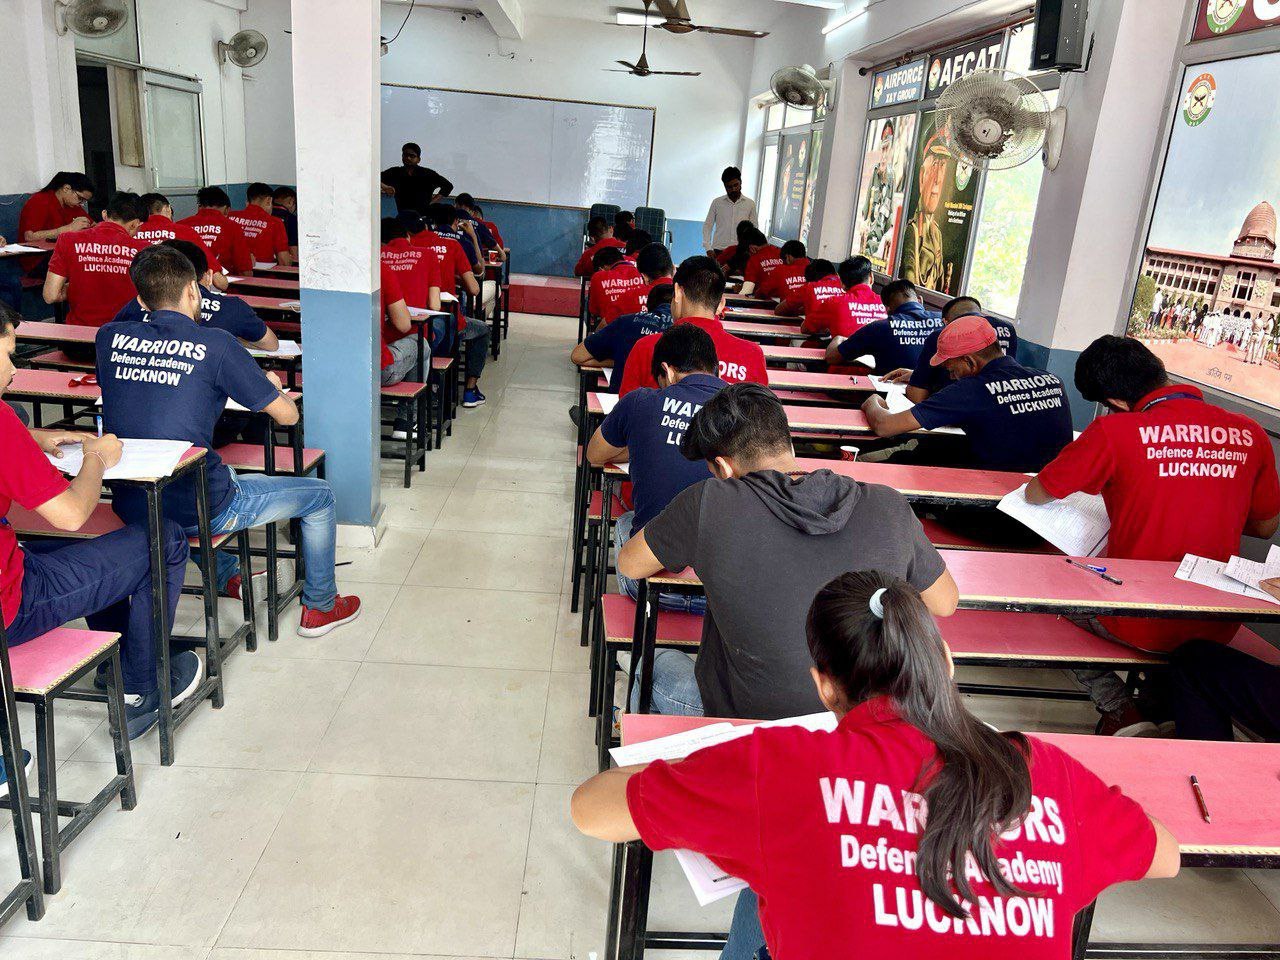 No-1 NDA Academy in Lucknow-UP | Warriors Defence Academy Best NDA Coaching in Lucknow